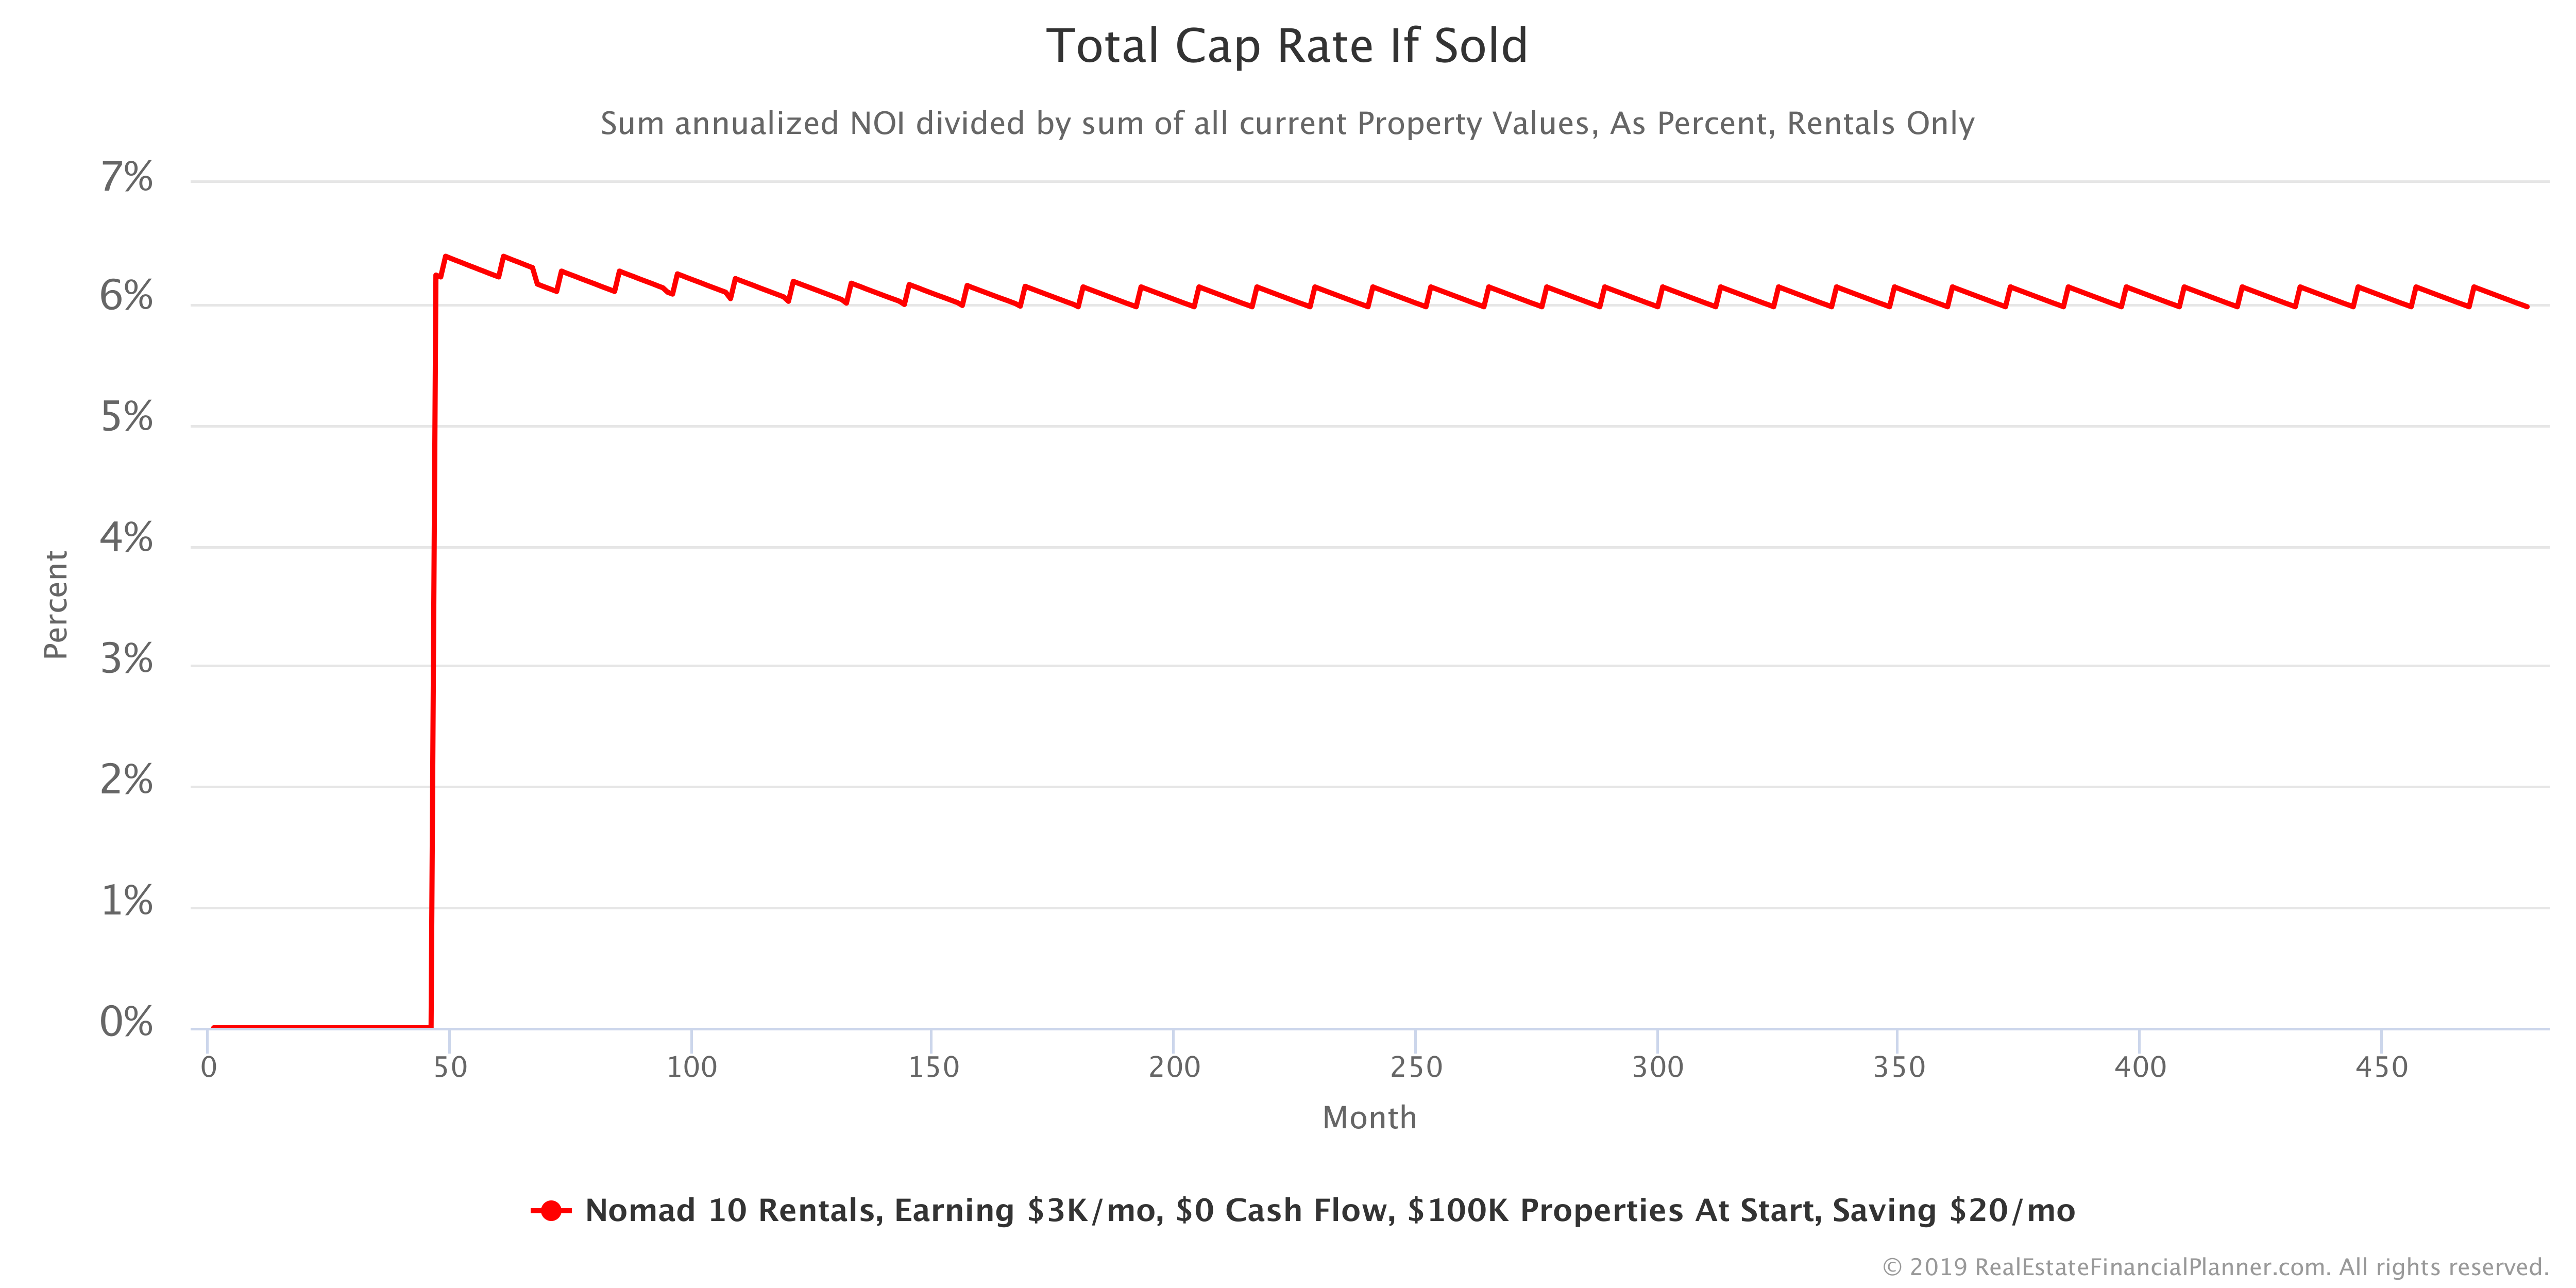 Total Cap Rate if Sold